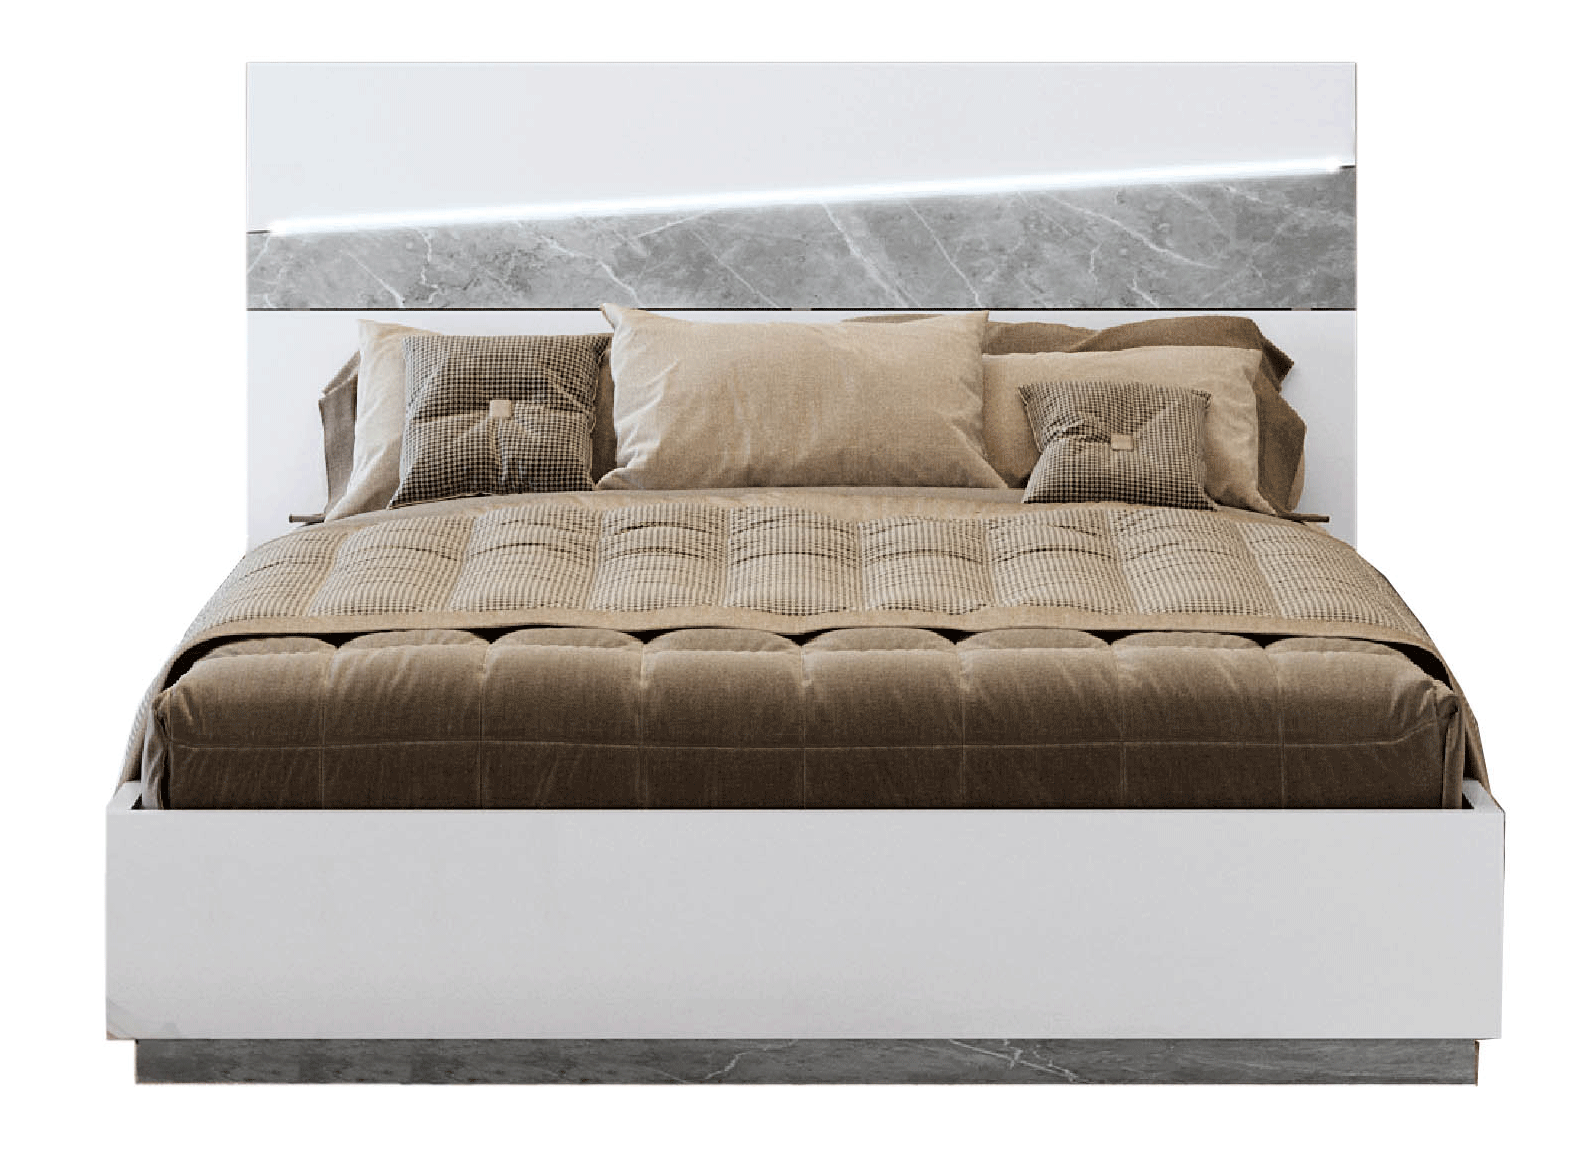 Brands Camel Classic Collection, Italy Alba Bed w/ Light, Italy